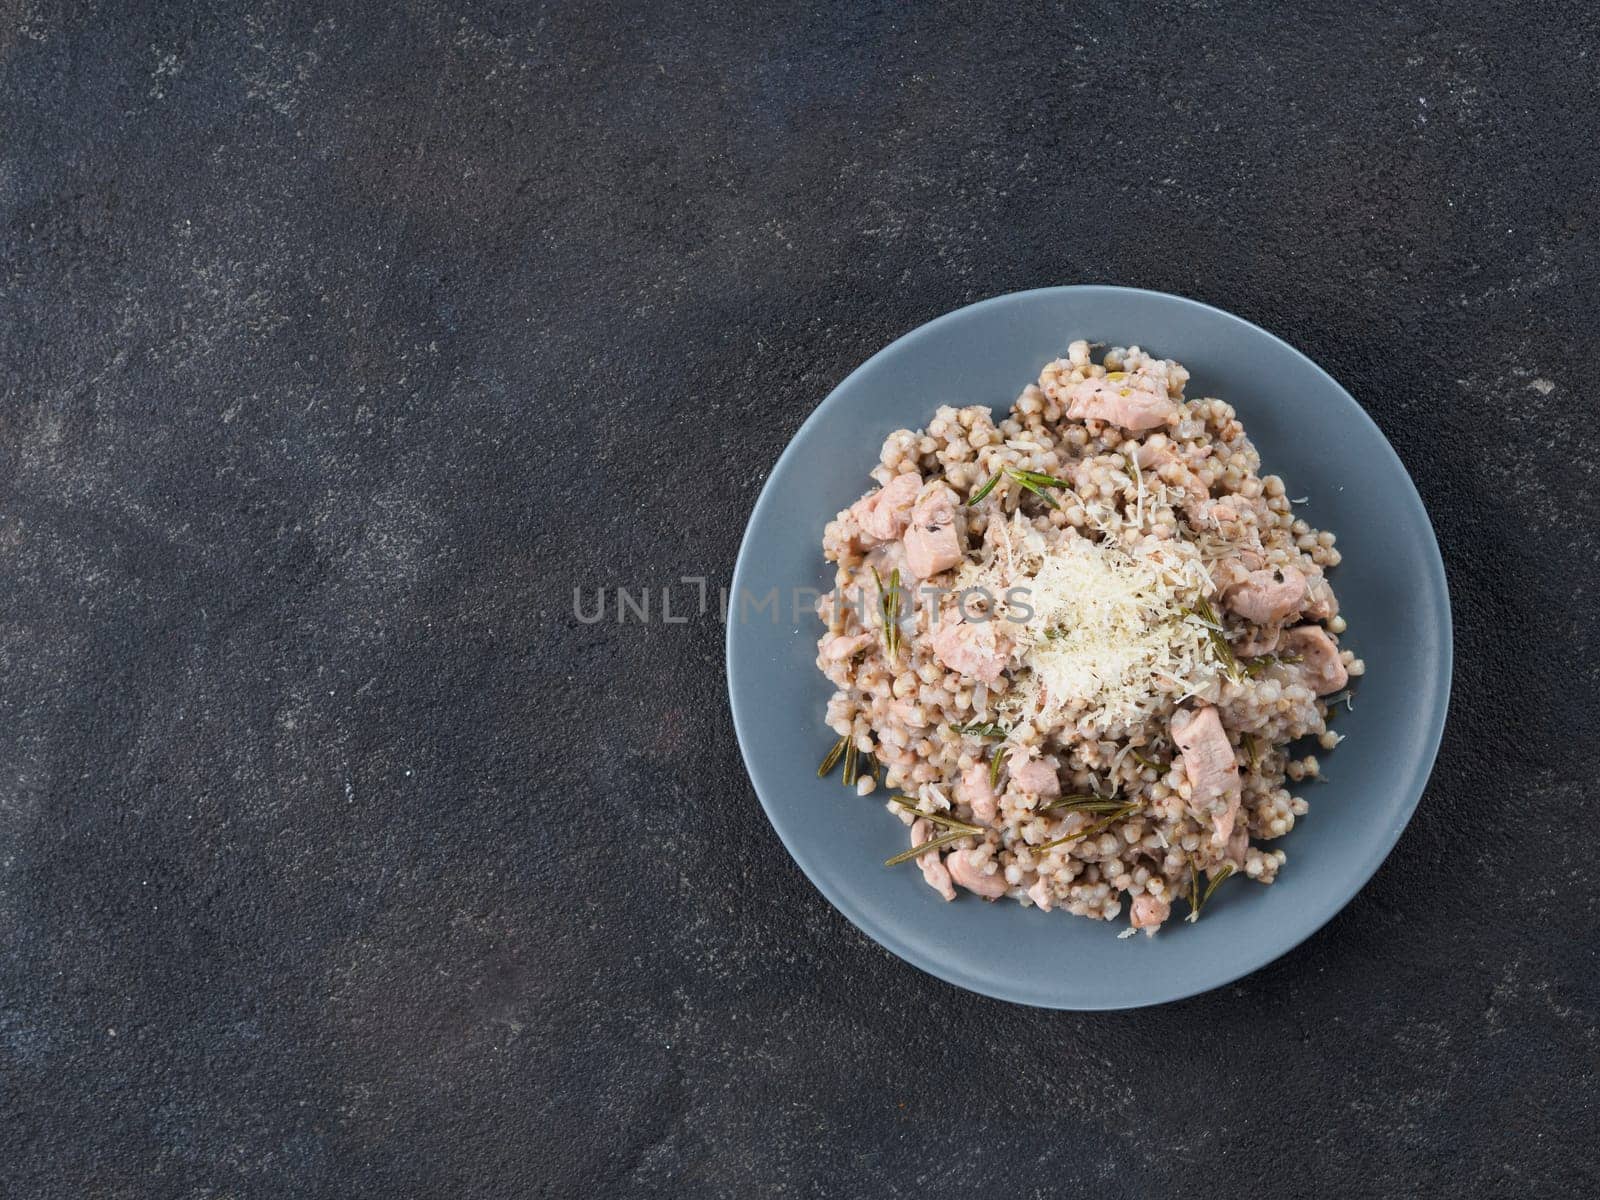 Raw buckwheat risotto with chicken meat and rosemary served parmesan cheese in gray plate on black cement background. Gluten-free and buckwheat recipe ideas. Copy space.